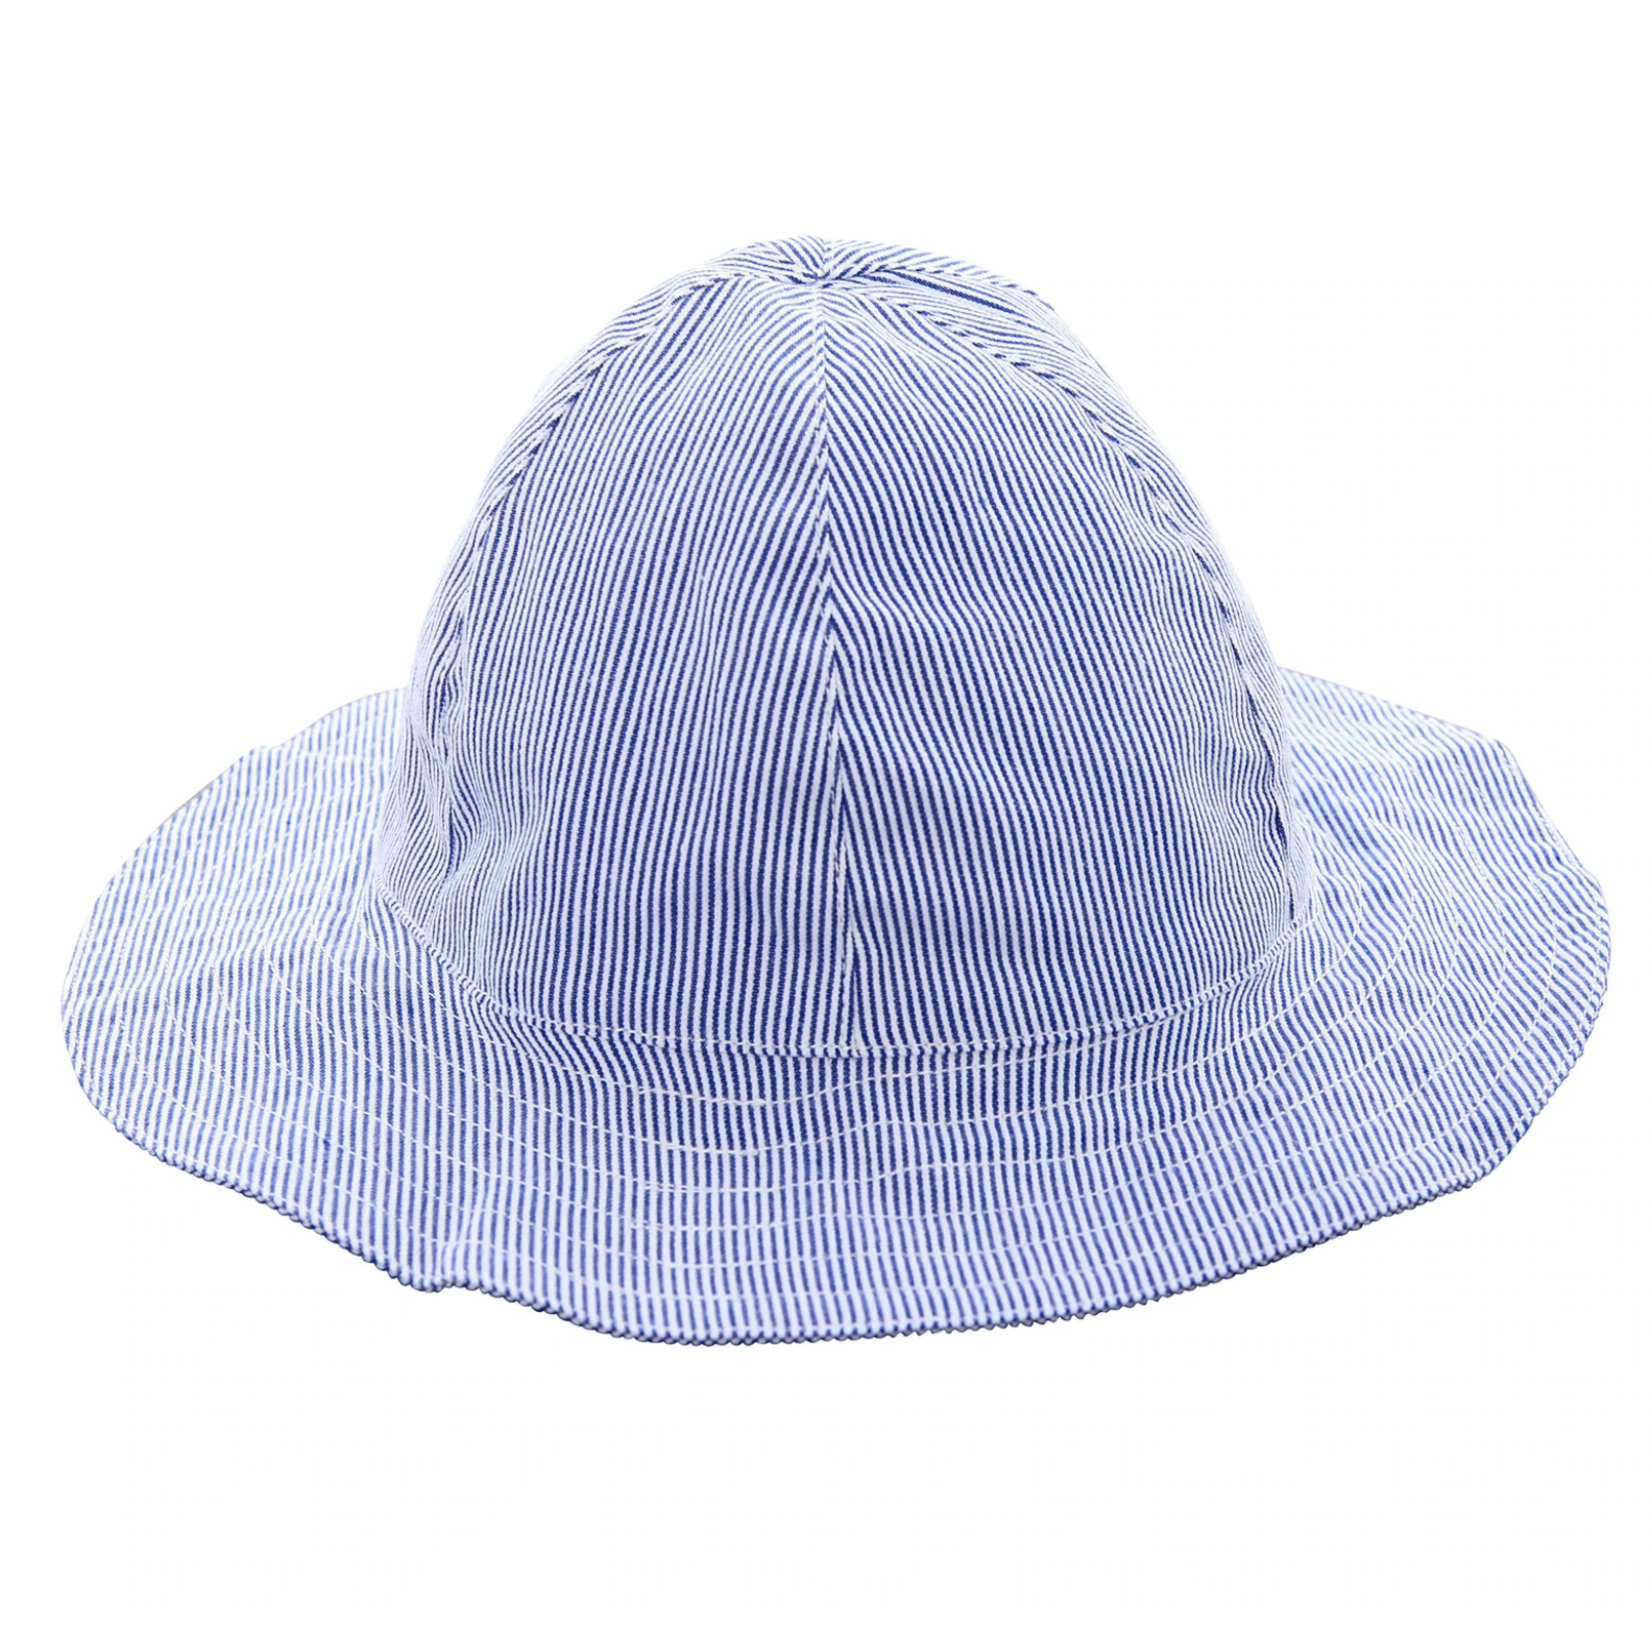 Busy Bees Kids Baby Sun Hat Navy